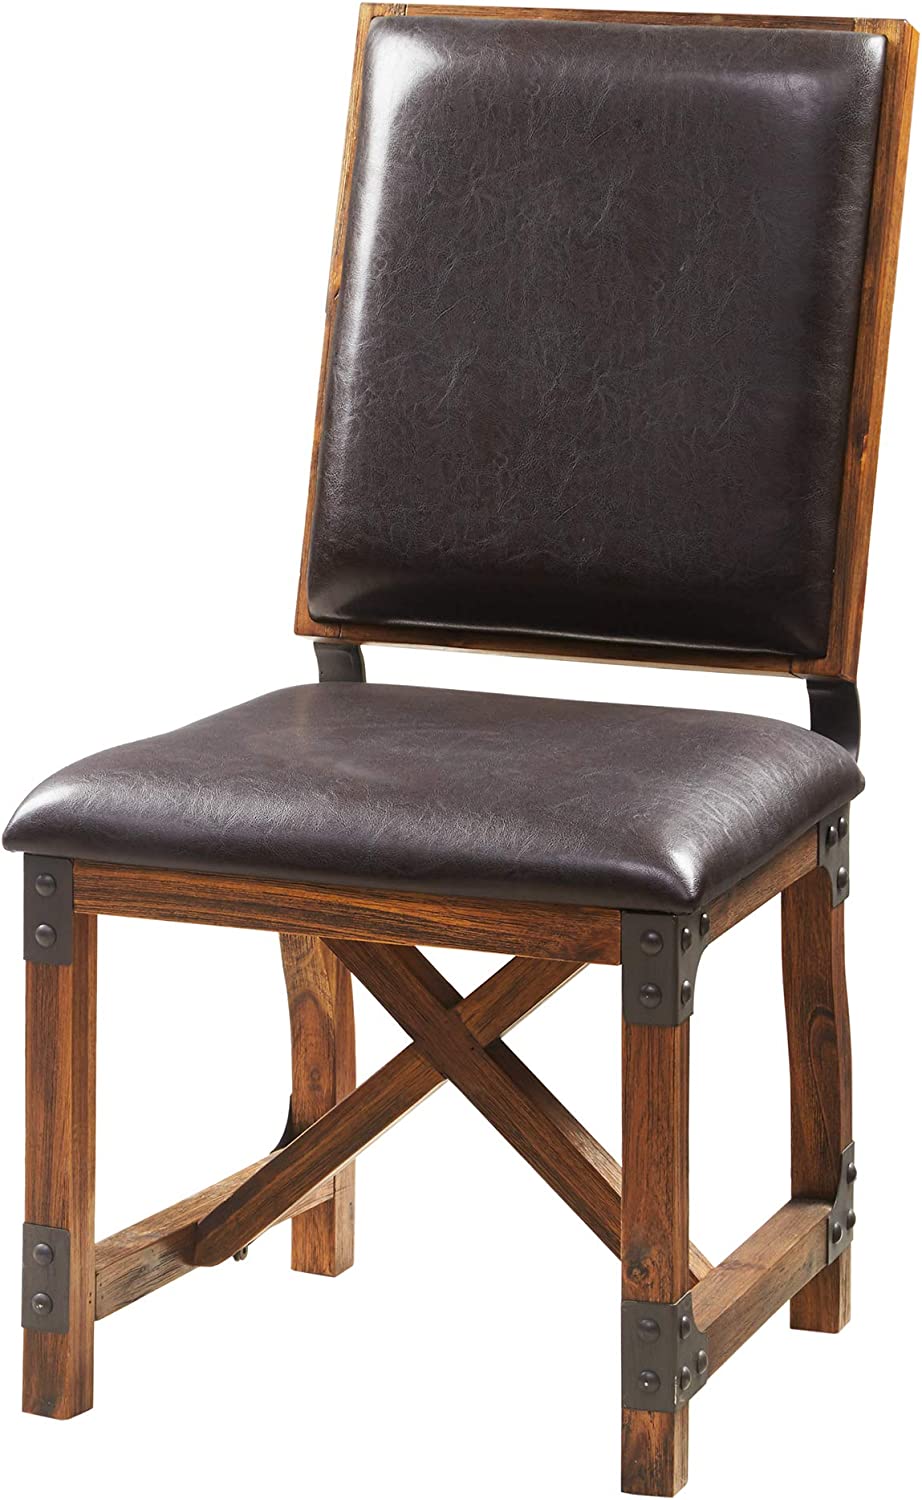 INK+IVY Lancaster Dining Chairs - Solid Wood, Metal Kitchen Stool with Back Rest - Amber Wood, PU Cover Industrial Style Stools - 1 PC Dinner Furniture, Chocolate, 38.5 inch